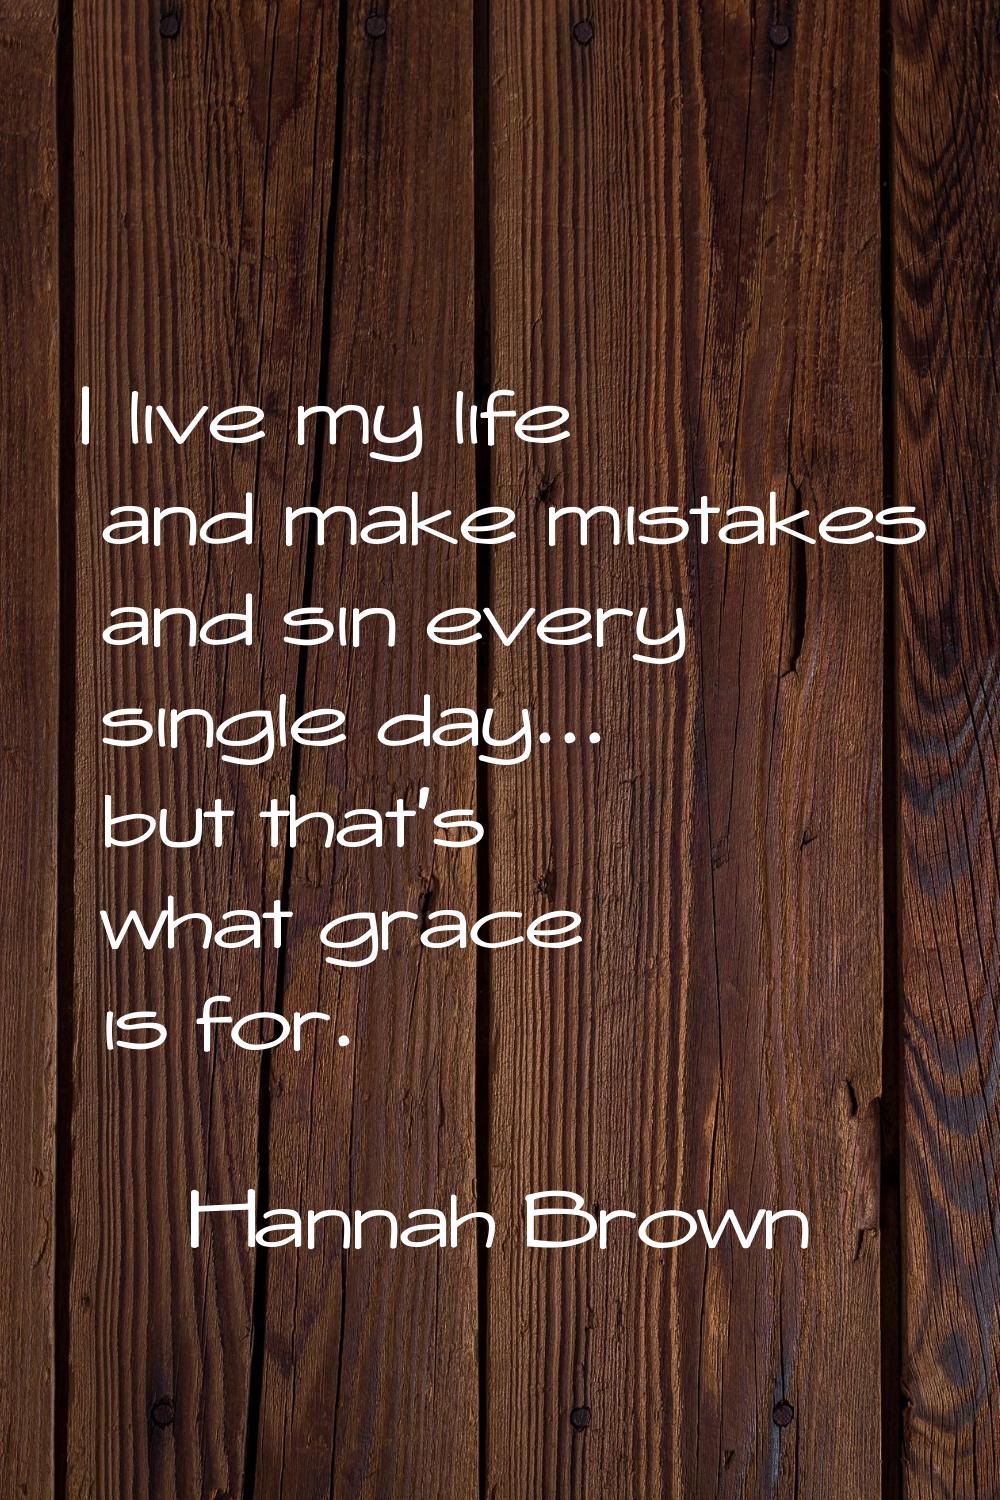 I live my life and make mistakes and sin every single day... but that's what grace is for.